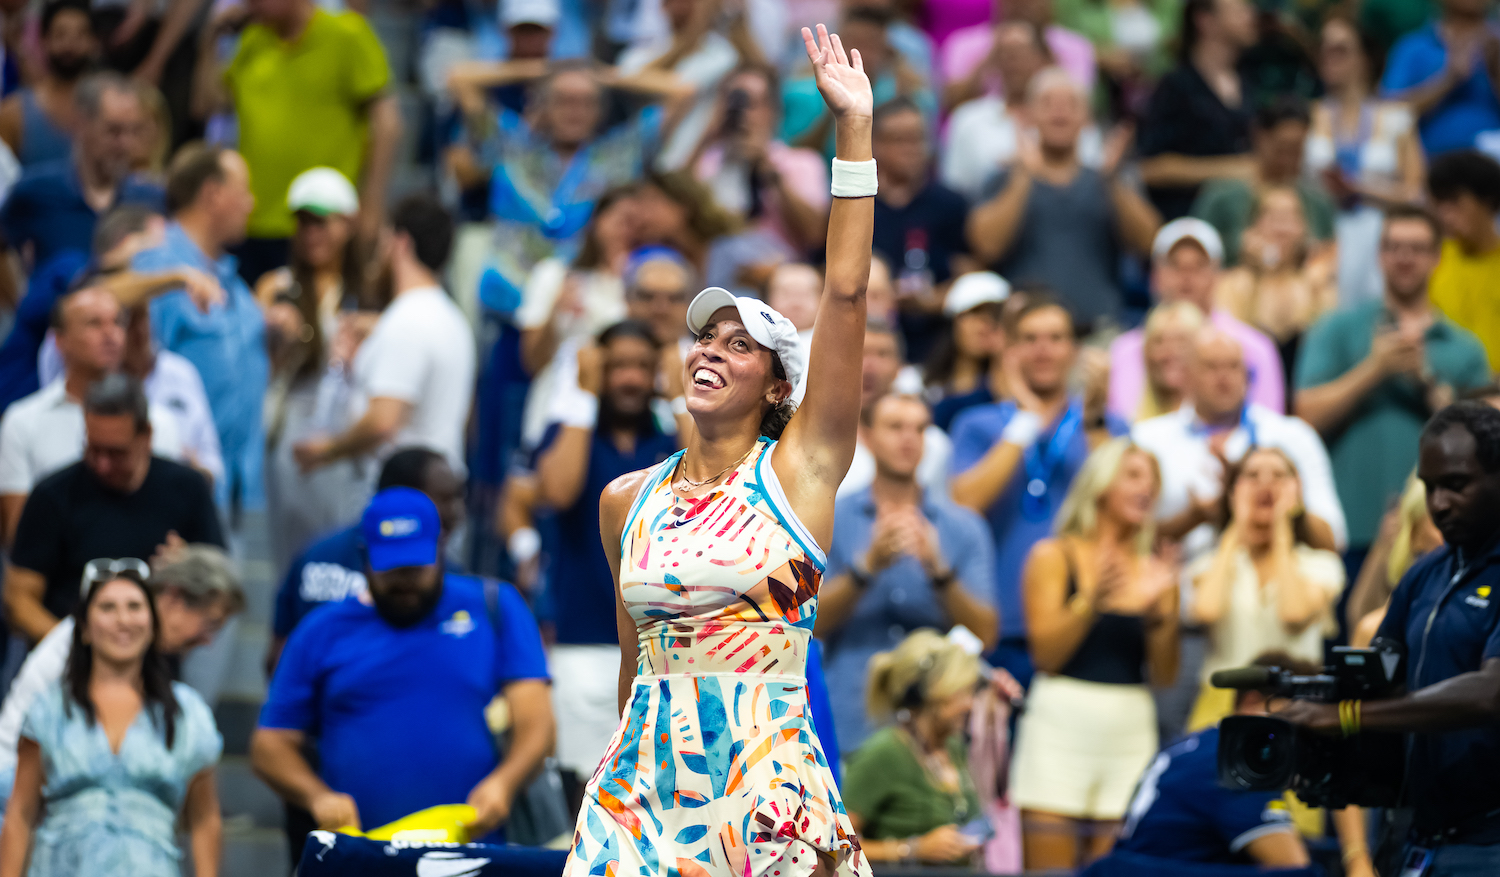 NEW YORK, NEW YORK - SEPTEMBER 06: Madison Keys of the United States celebrates defeating Marketa Vondrousova of the Czech Republic in the quarter-final on Day 10 of the US Open at USTA Billie Jean King National Tennis Center on September 06, 2023 in New York City (Photo by Robert Prange/Getty Images)